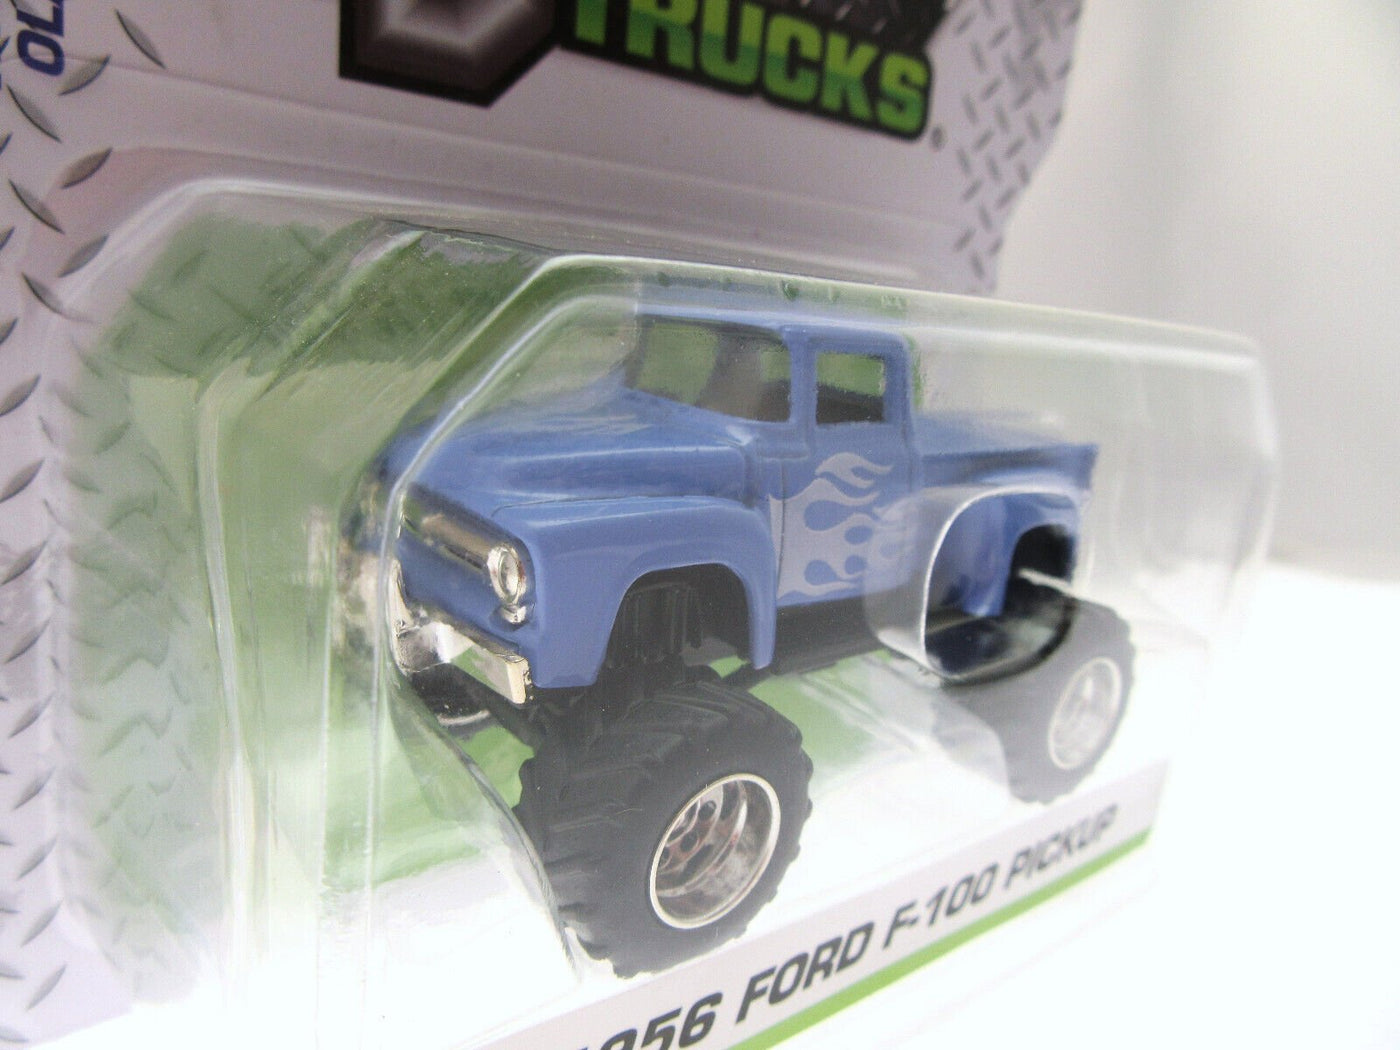 1956 Ford F-100 Pickup ~ Blue with Flames ~ Die Cast Metal ~ Just Trucks